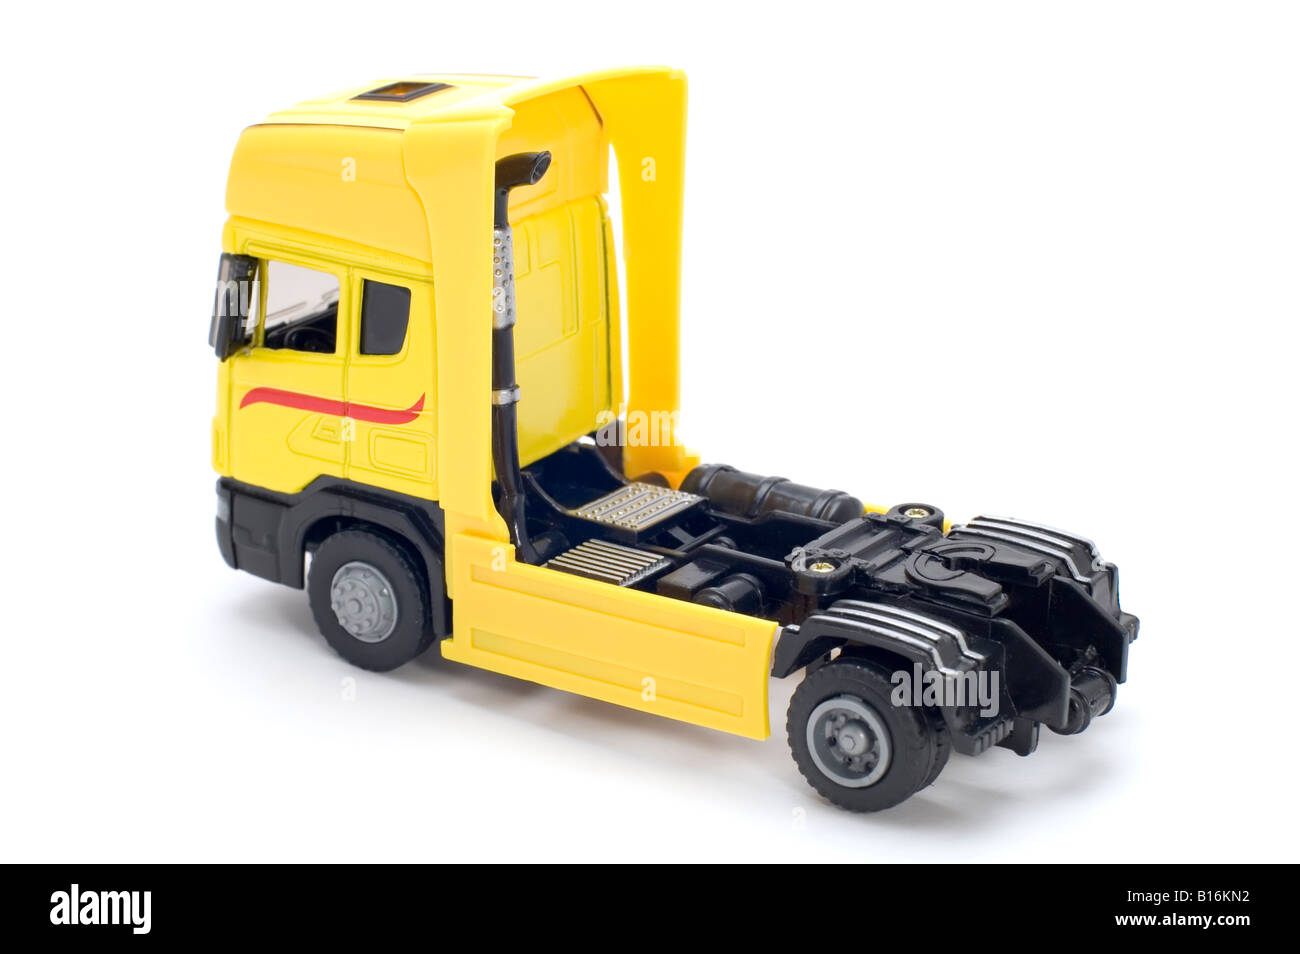 object on white toy yellow truck Stock Photo